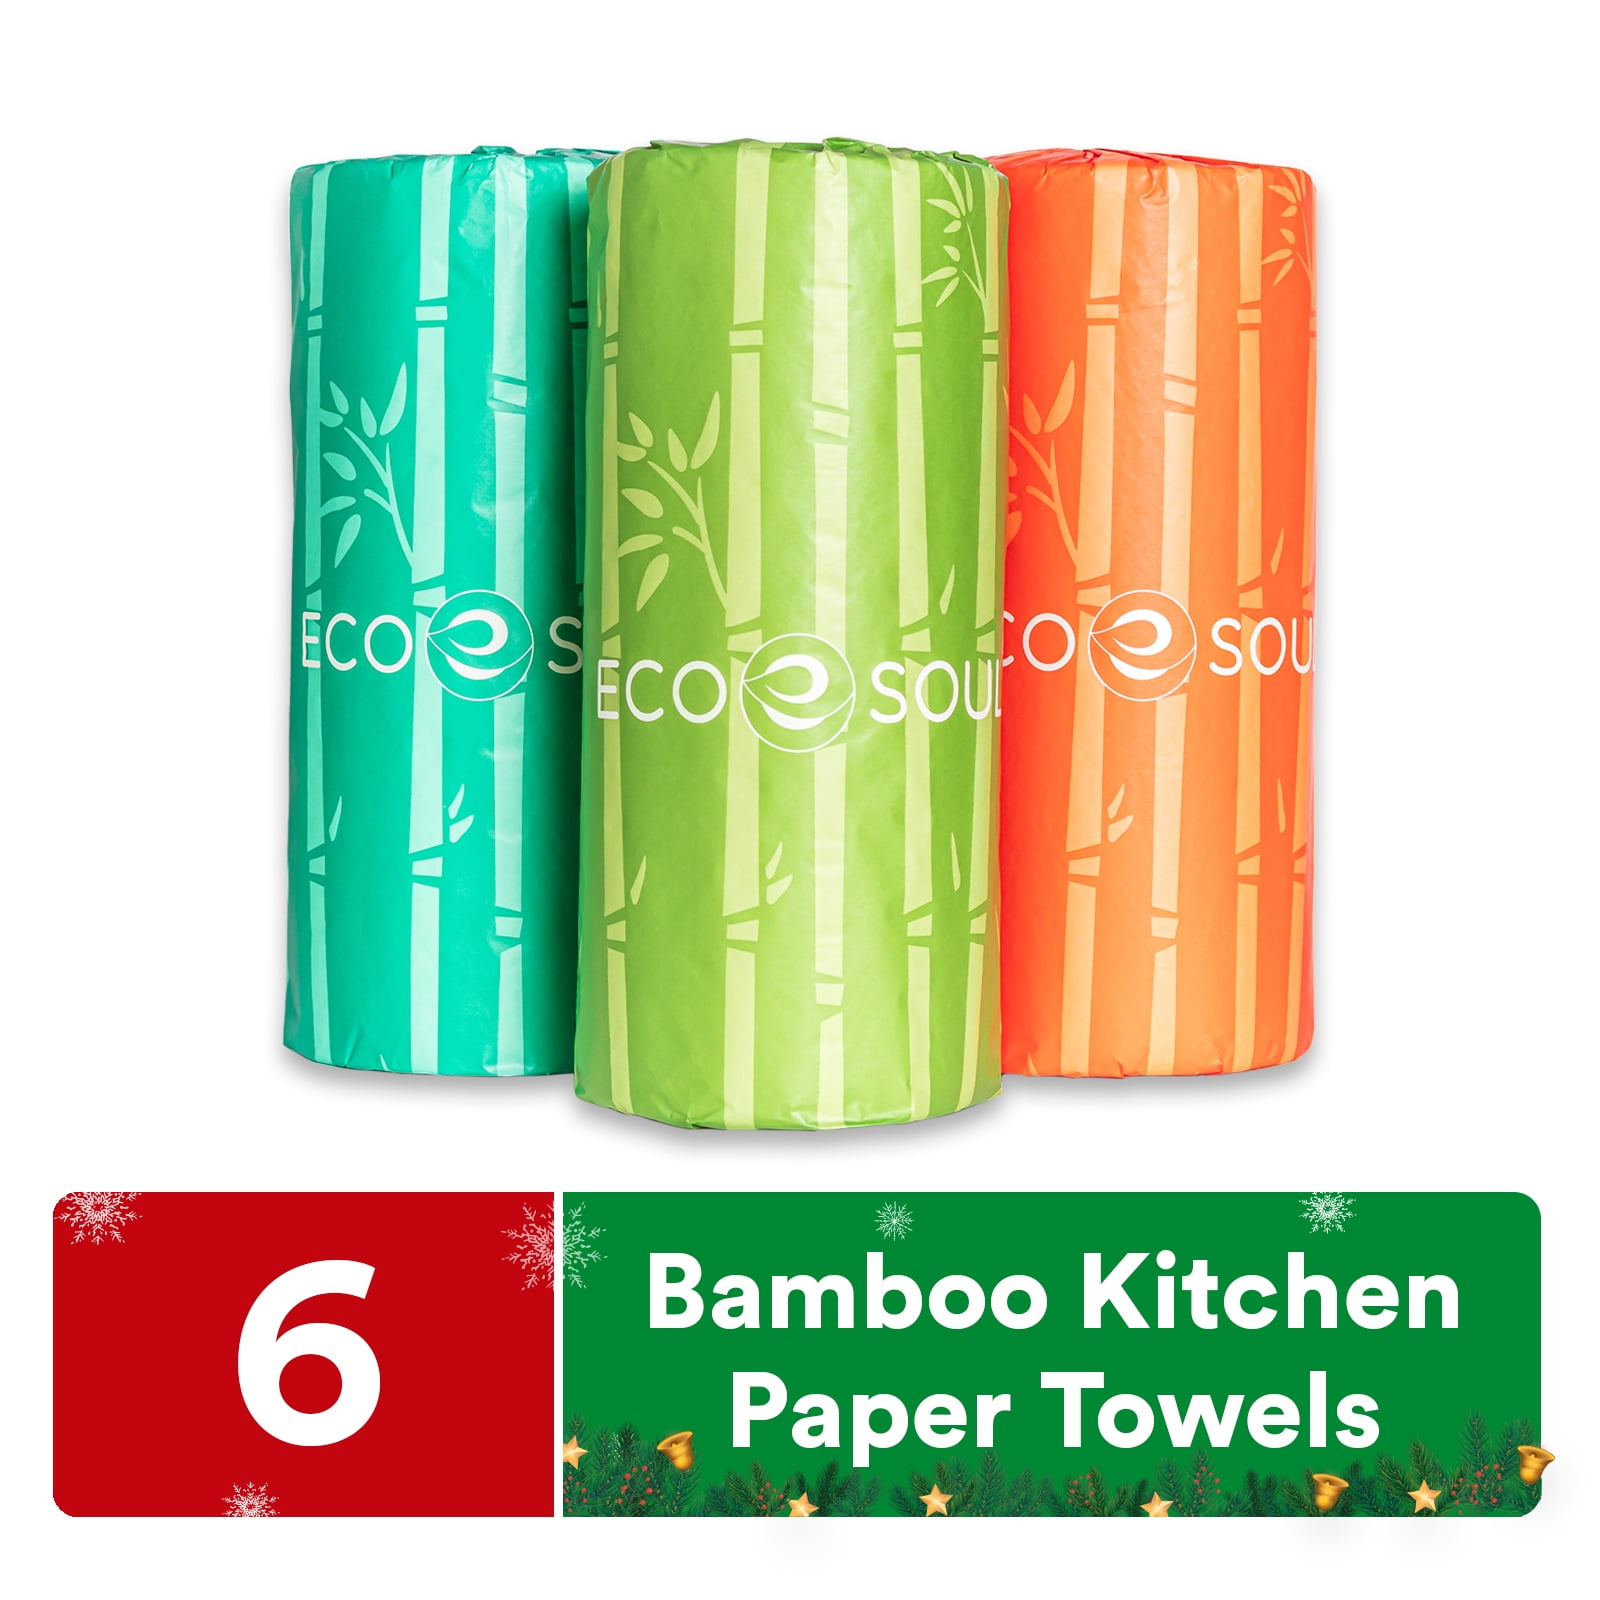 Eco Soul 100% Compostable Bamboo Kitchen Paper Towel Set of 12 Rolls | 2Ply with 1800 Sheets, 150 Sheet Each | Eco-Friendly Soft Paper Towel, Kitchen